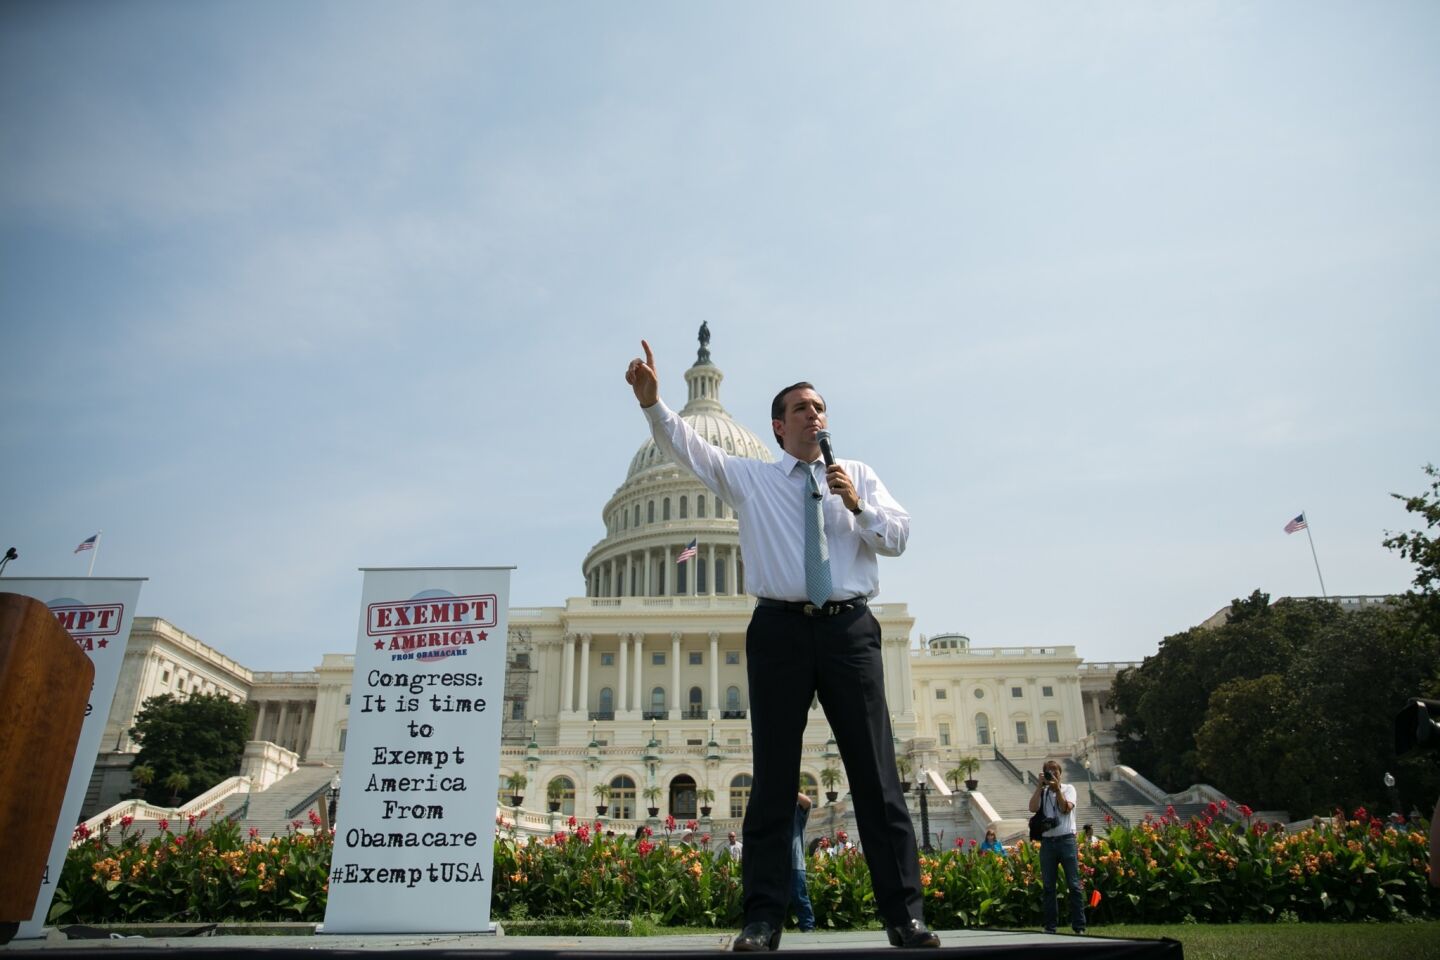 Sen. Ted Cruz (R-Texas) speaks during the "Exempt America From Obamacare" rally on Capitol Hill in Washington, D.C.